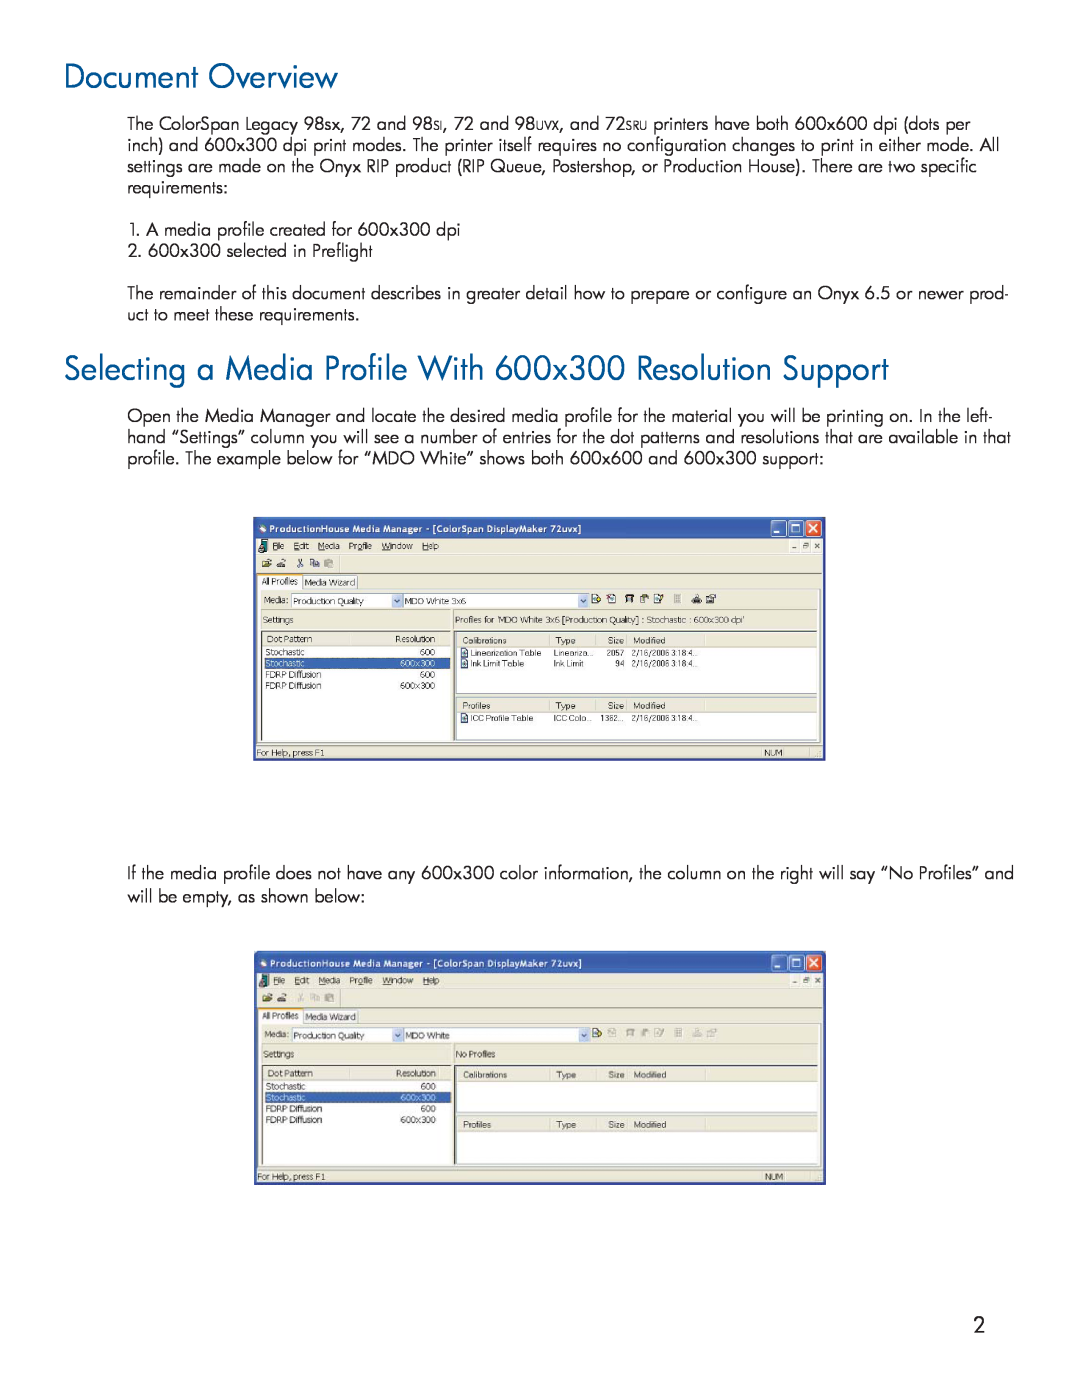 HP Scitex FB910 manual Document Overview, Selecting a Media Proﬁle With 600x300 Resolution Support 